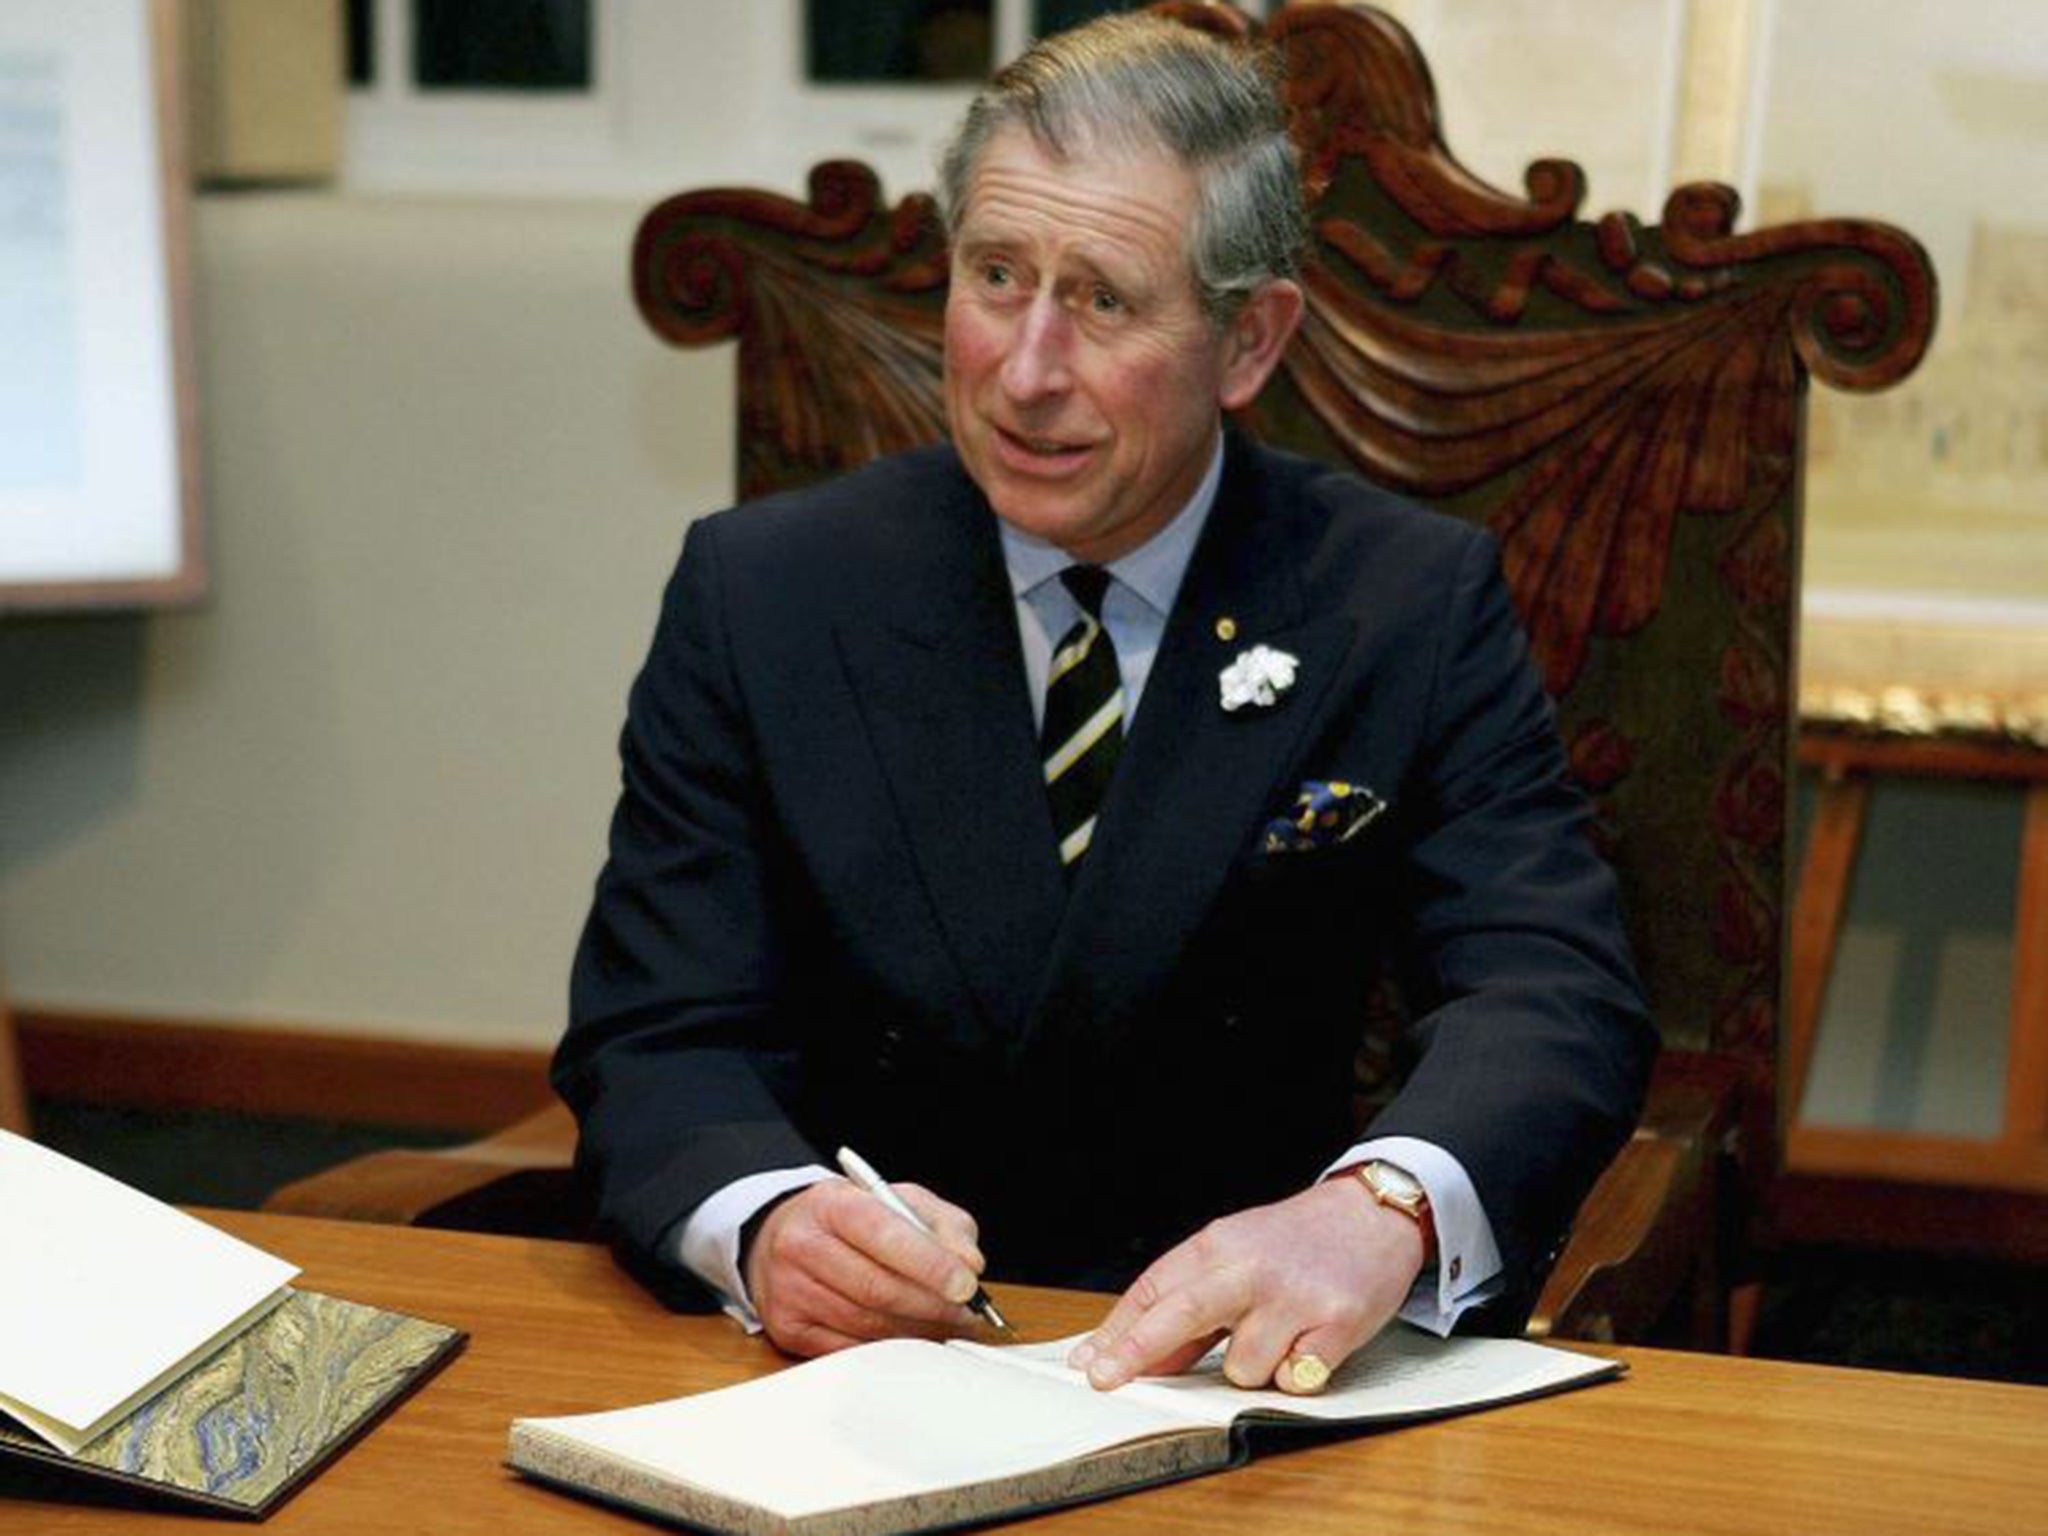 In the latest release of 'Black Spider' letters Prince Charles raises issues from the plight of listed buildings and rural housing to efforts to eradicate the poisonous ragwort plant